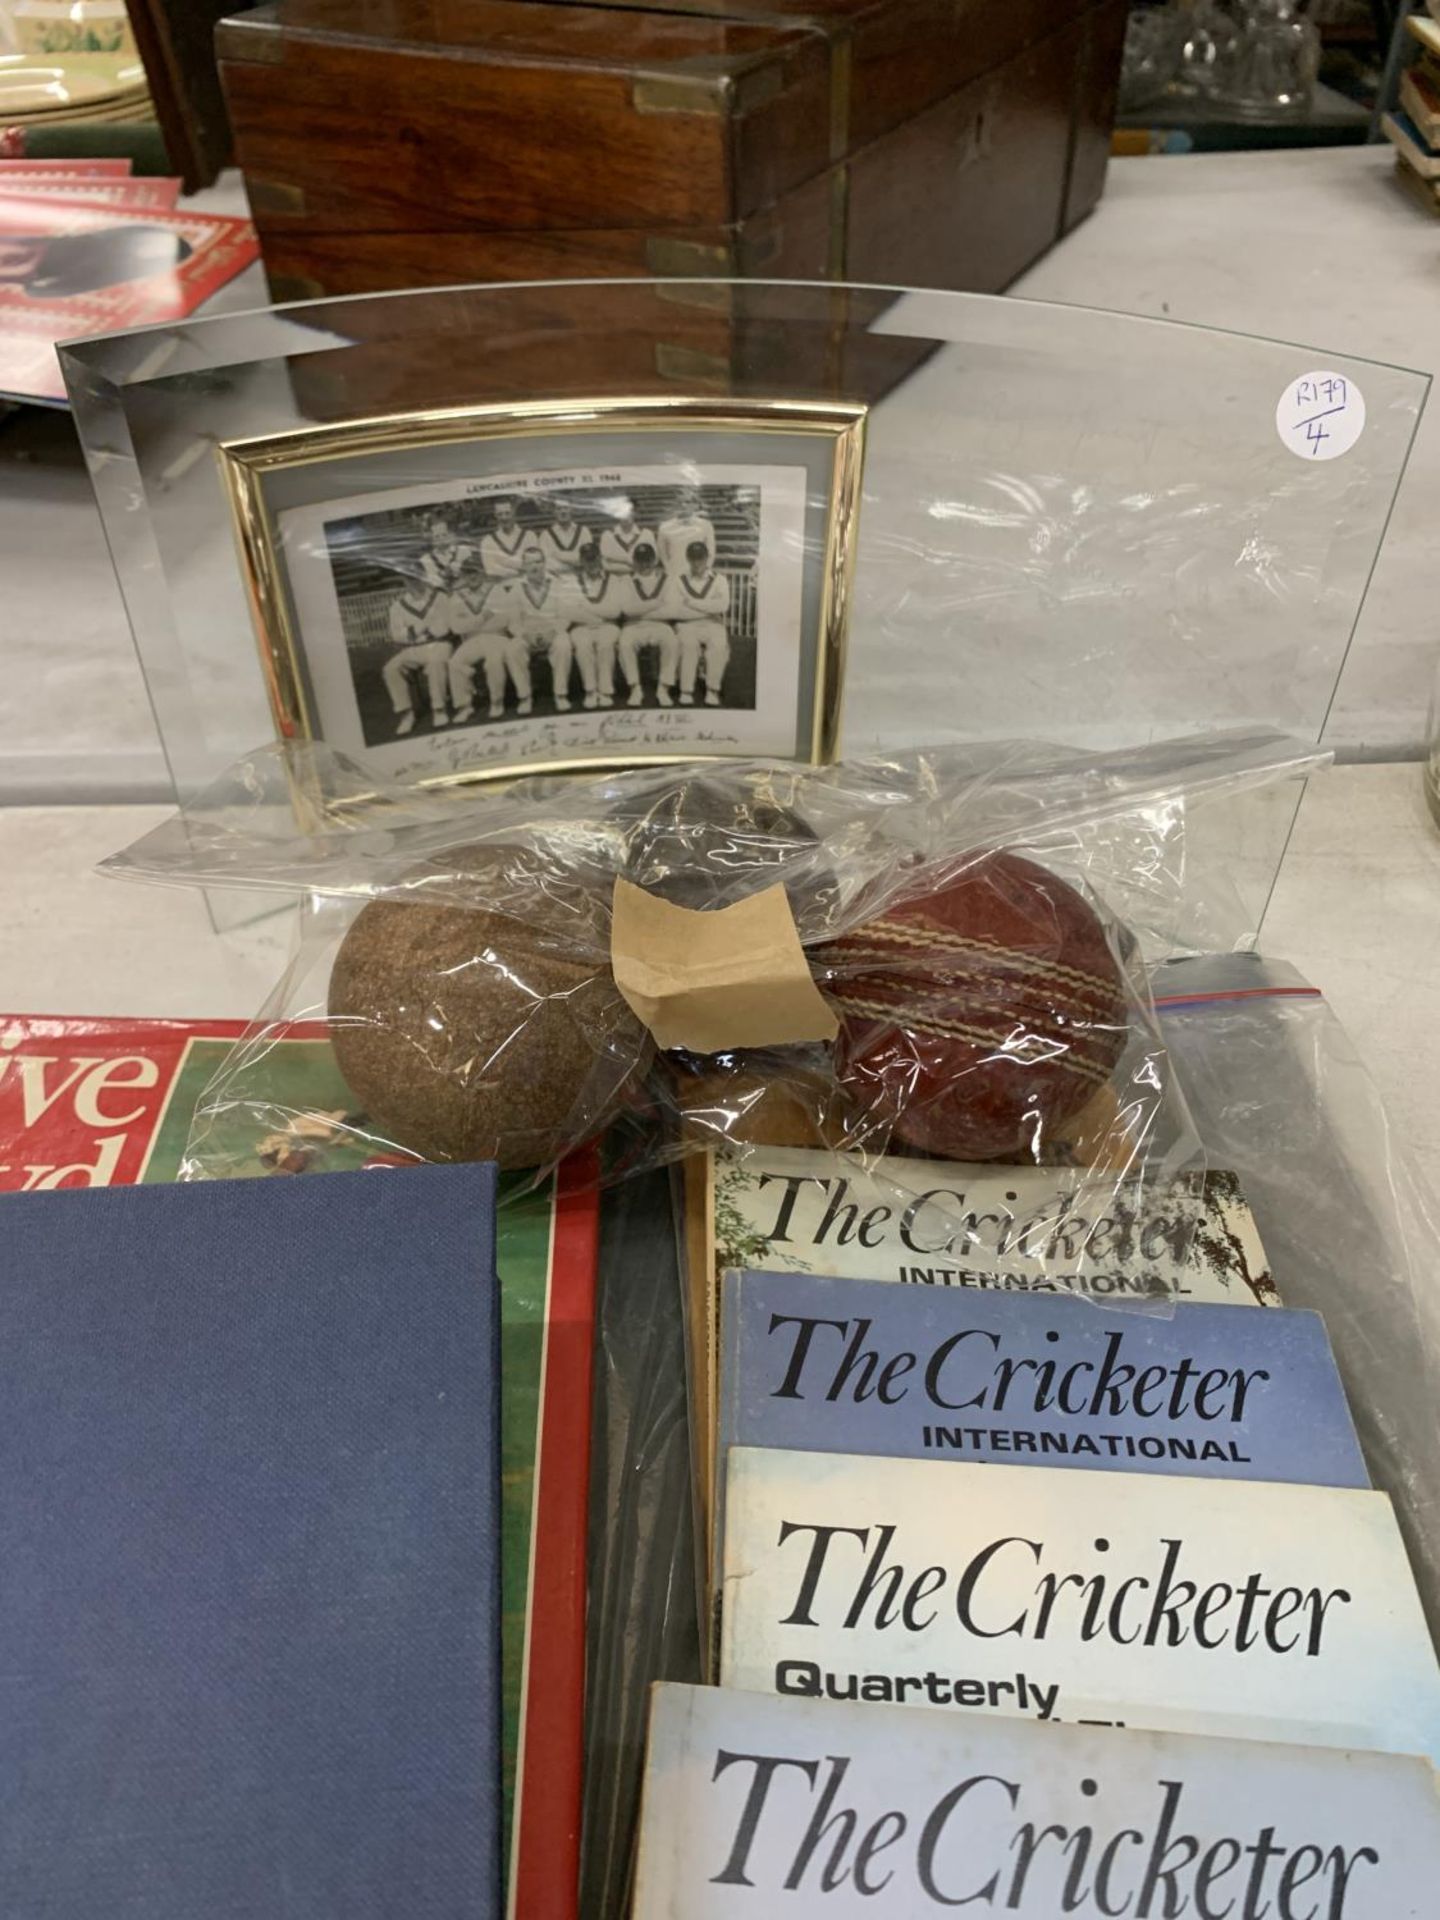 A COLLECTION OF VINTAGE LANCASHIRE CRICKET CLUB ITEMS TO INCLUDE BOOKS, A SIGNED 1948 PHOTO AND - Image 2 of 3